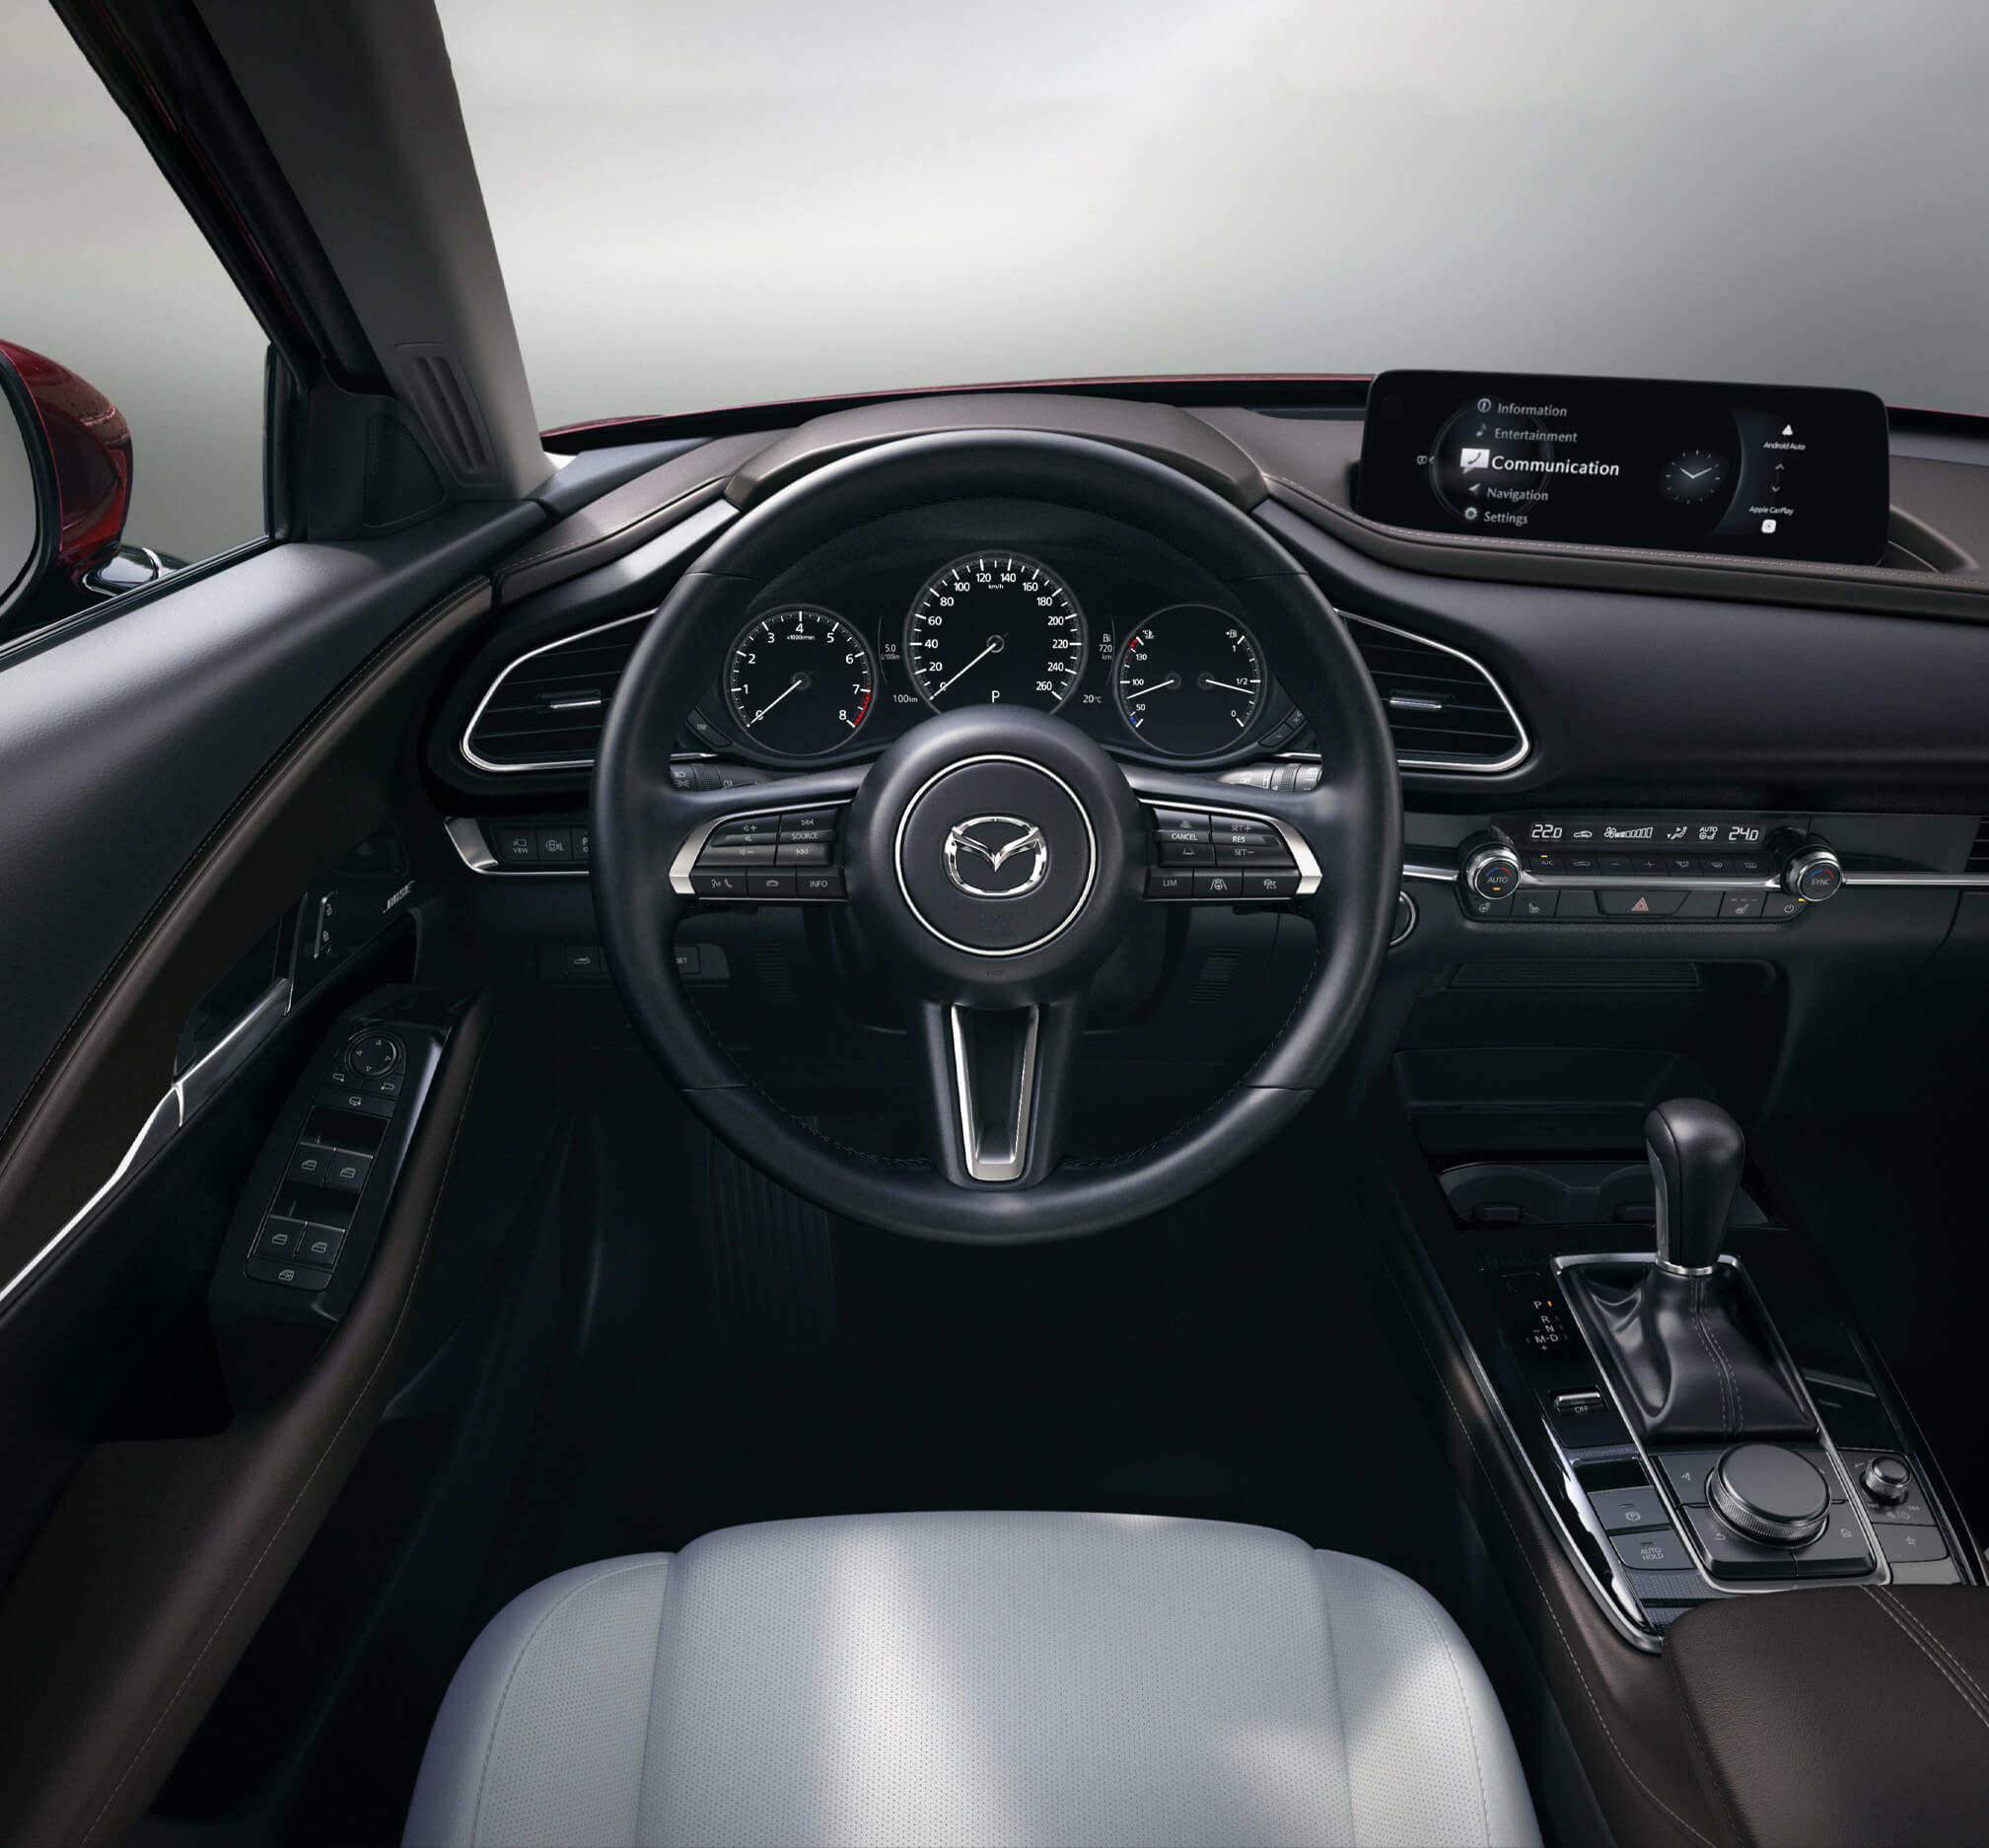 https://mazda-brochures.com/main/mazdacx30/2023/1/en-fi/assets/images/steering-wheel-of-the-madza-cx-30-with-beautiful-details.jpg